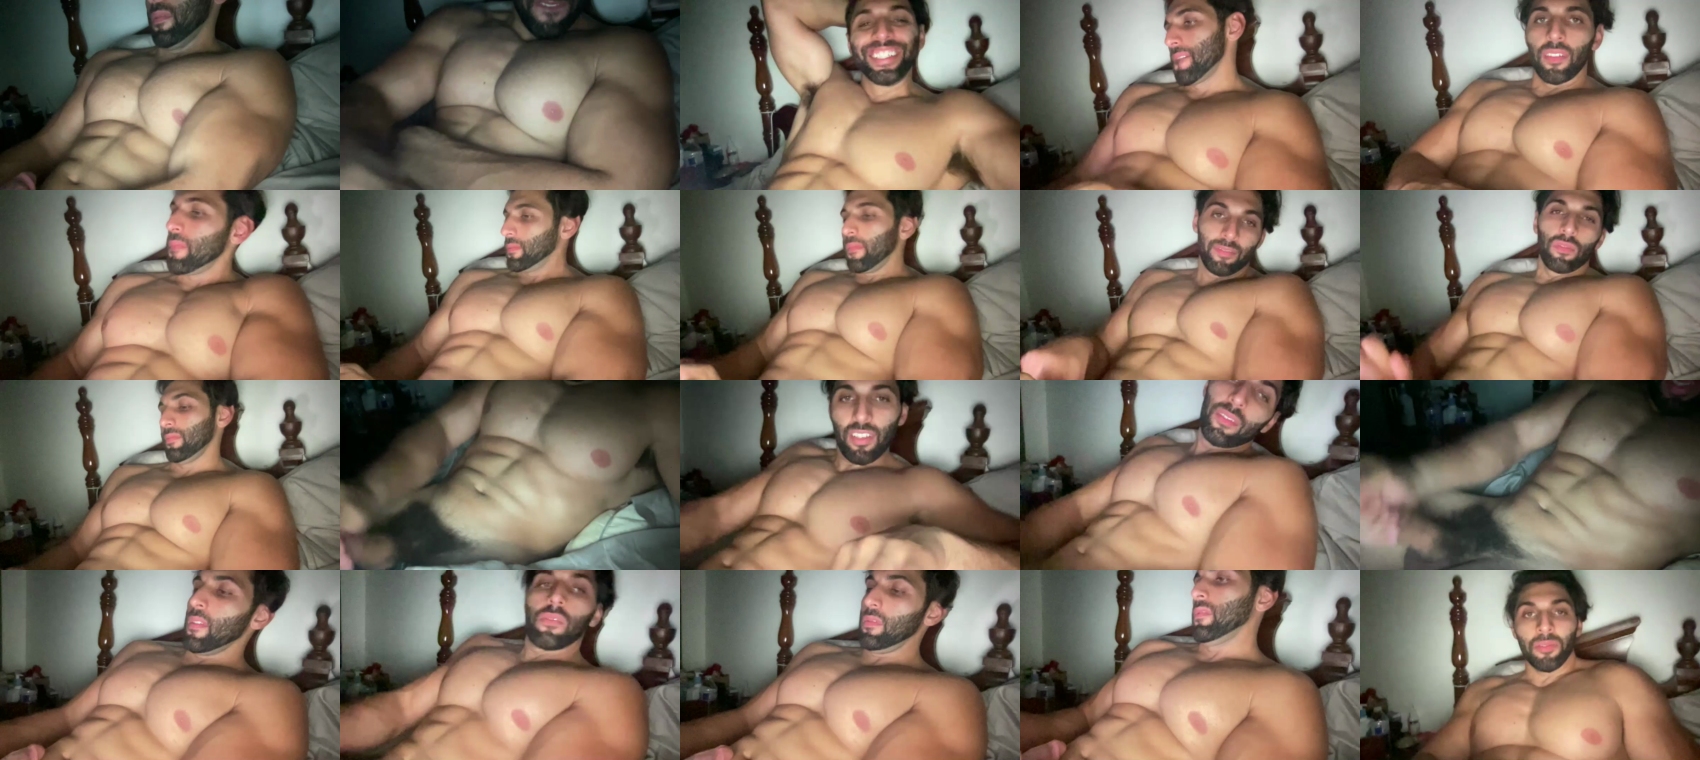 69_aalpha_m0delfforyou1 bigcock Webcam SHOW @ Chaturbate 27-10-2023